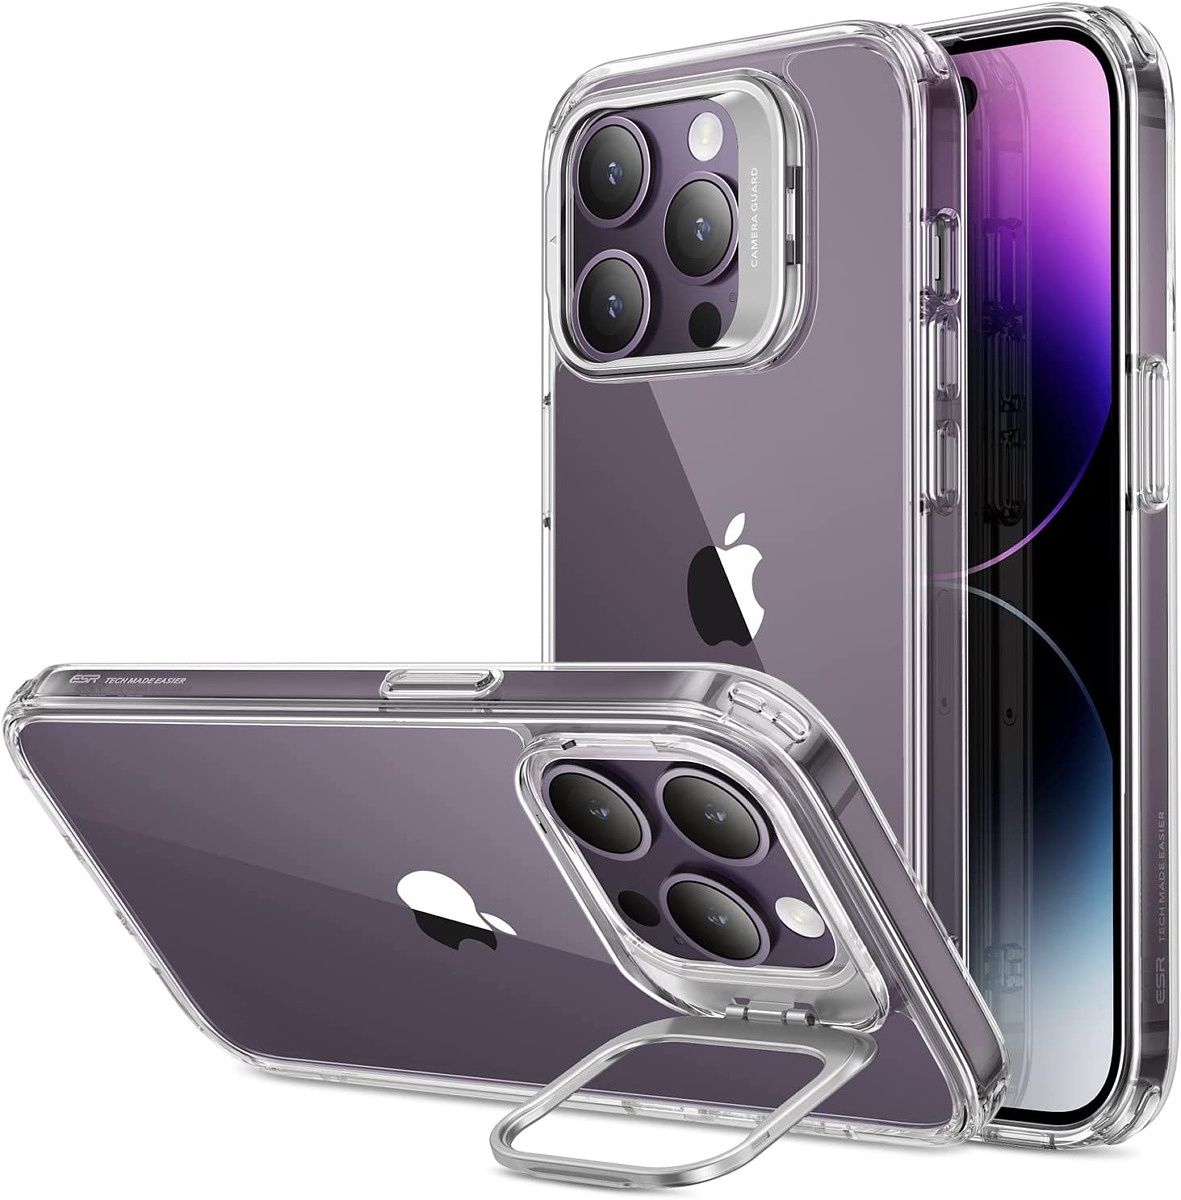 This clear case from ESR comes with an integrated camera guard kickstand so you can prop up your iPhone 14 Pro at the perfect angle for binge-watching Netflix or FaceTime with your friends. The case has shock-absorbing corners and durable zinc-alloy construction. 